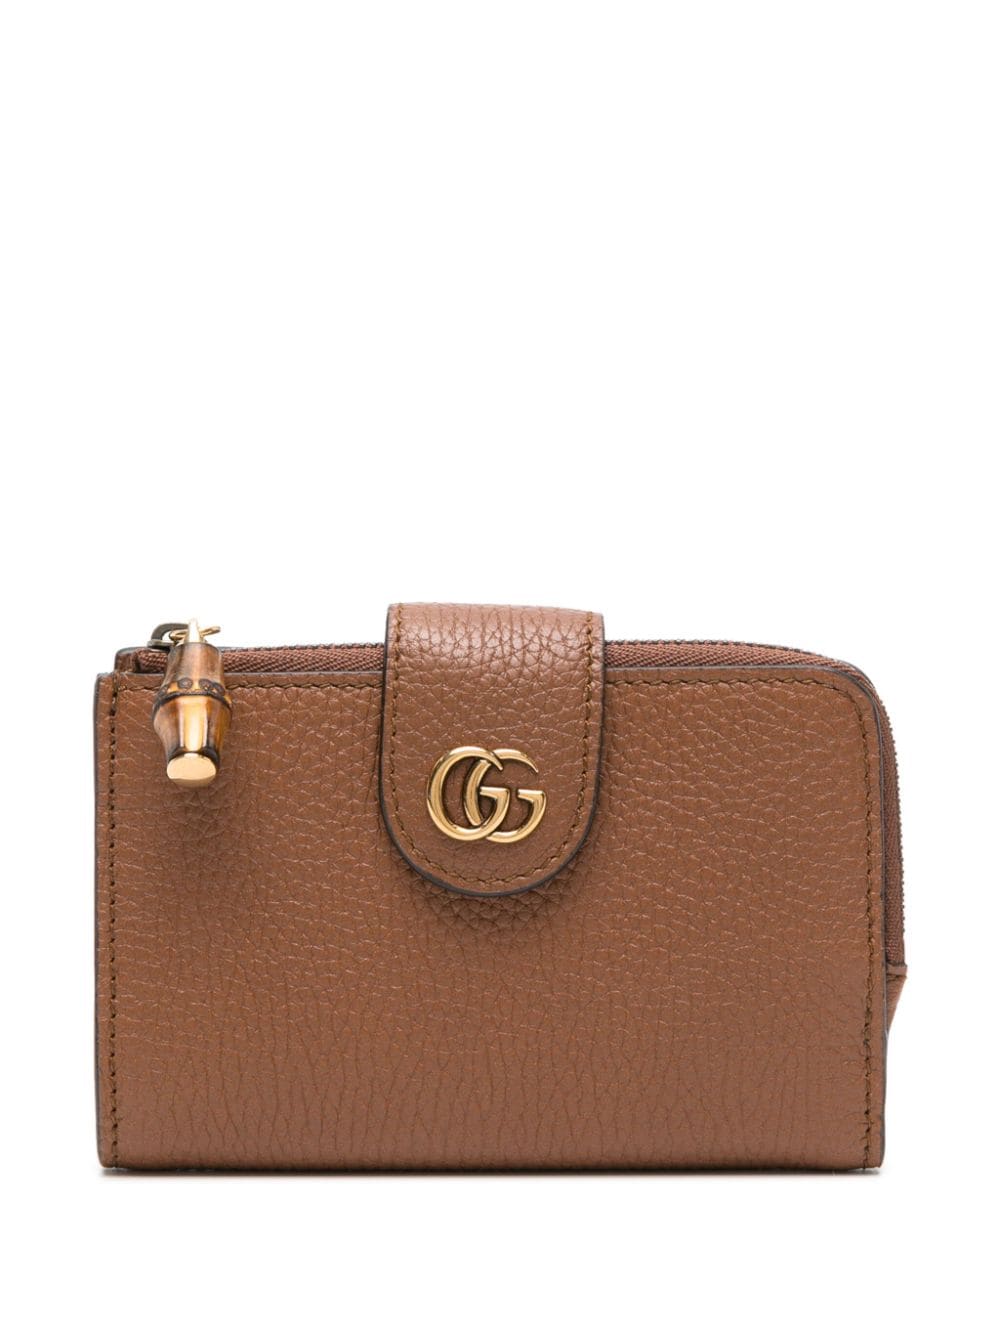 Gucci Medium Double G Leather Wallet In Brown